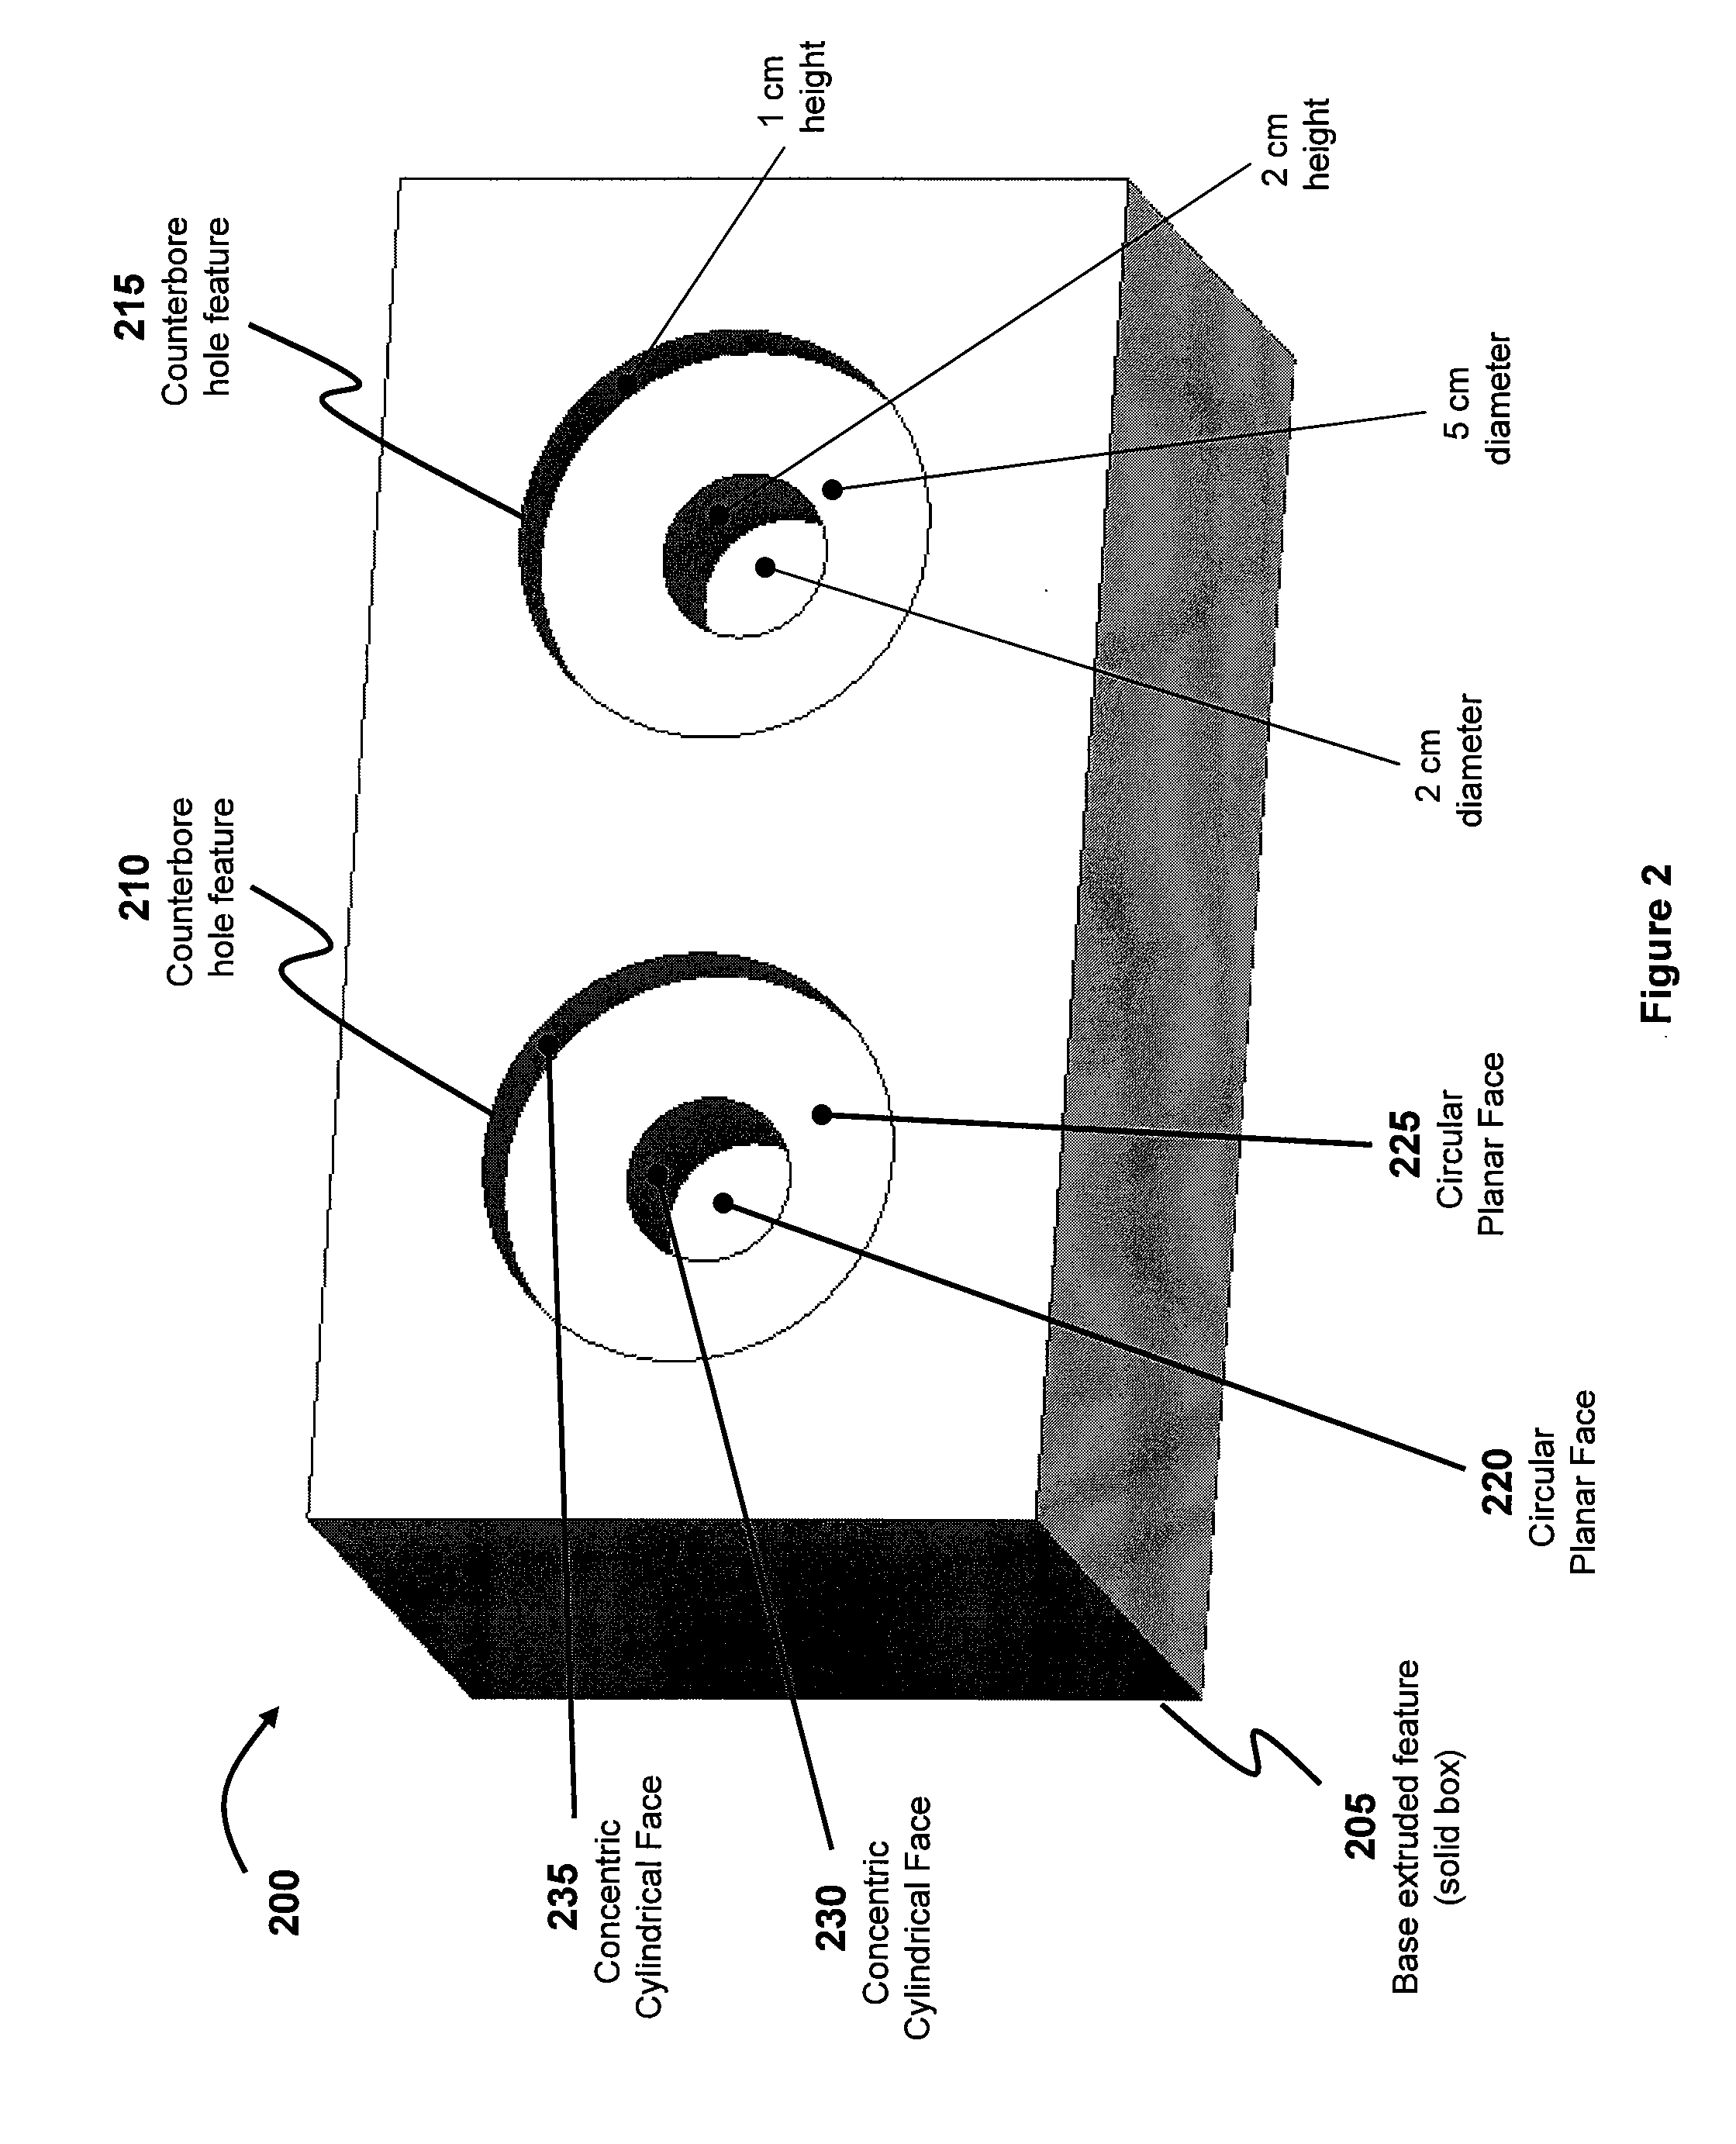 Method for validating features in a direct modeling paradigm